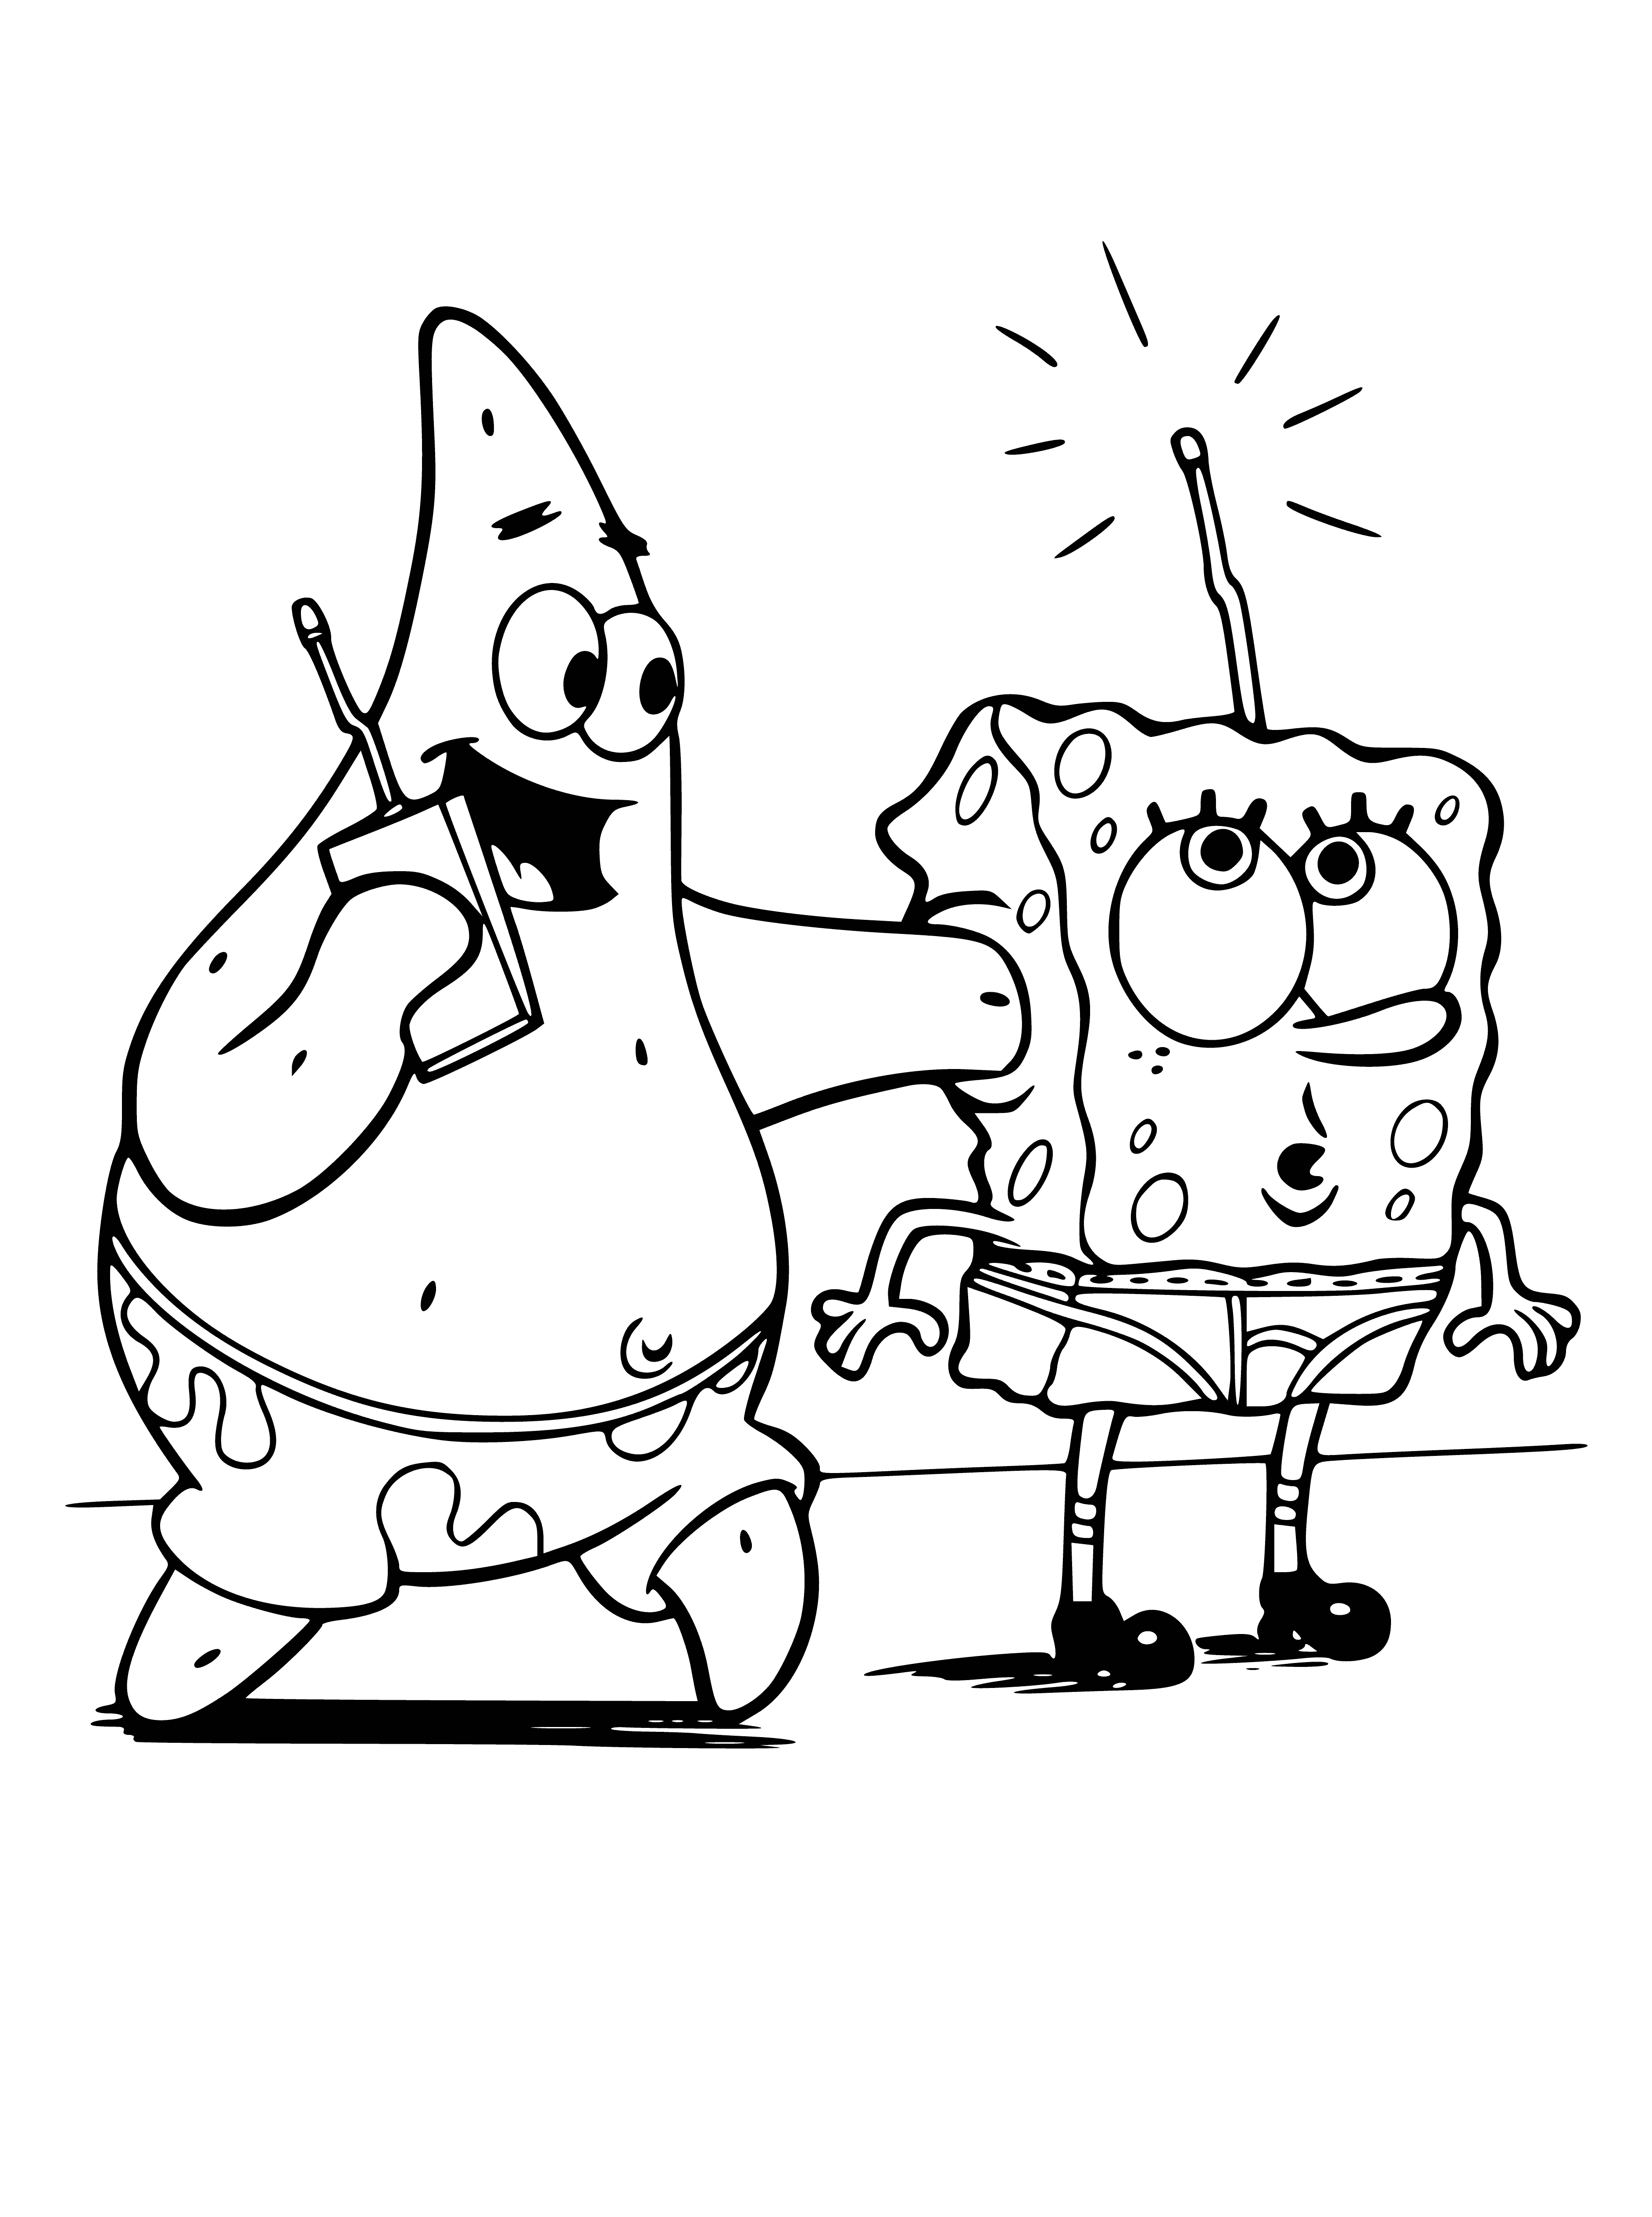 coloring page: SpongeBob and Patrick are Bikini Bottom pals with SpongeBob working at the Krusty Krab while Patrick always being there to support his best friend. Together they bring loads of fun & smiles!